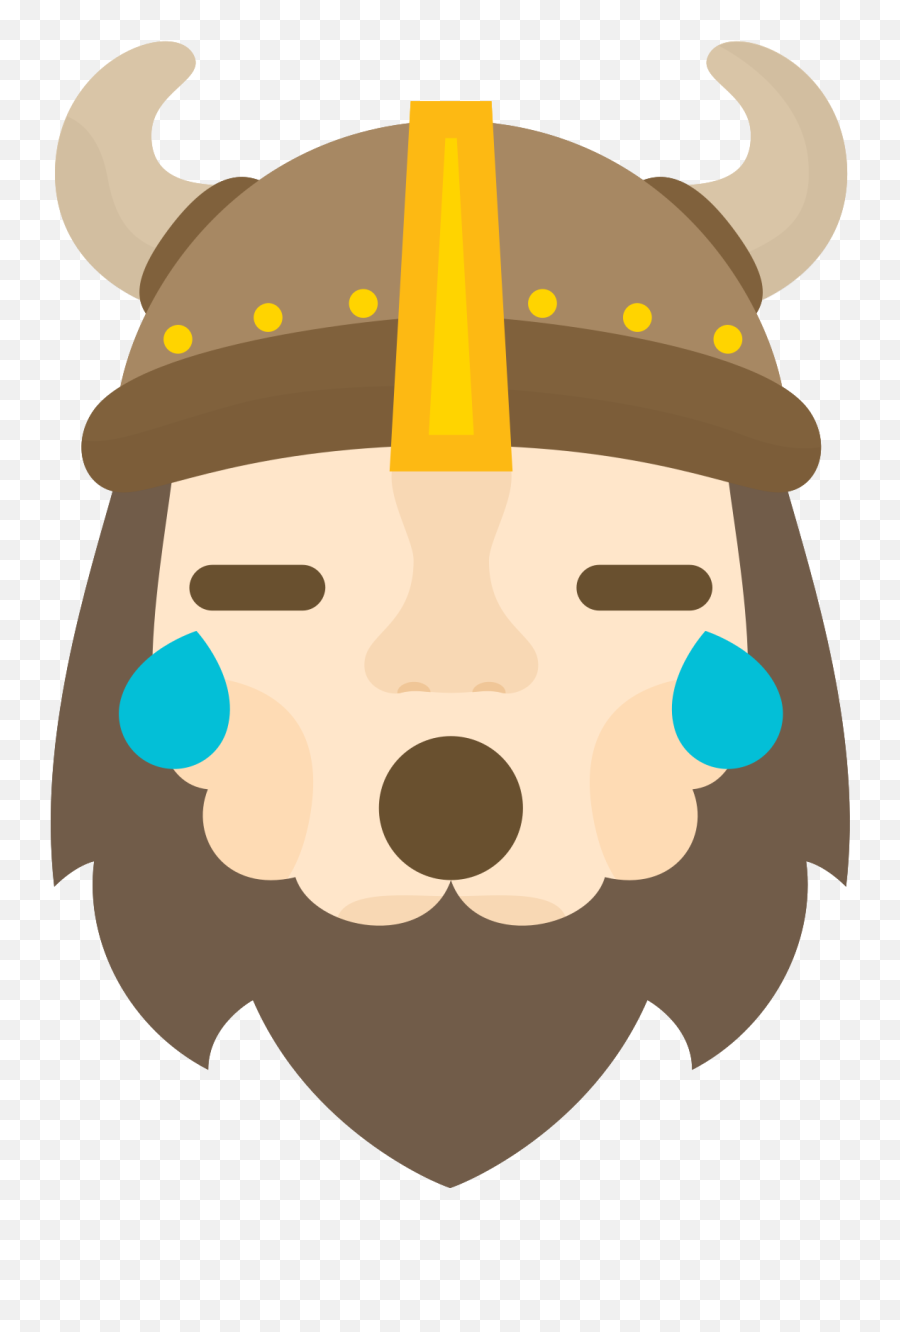 Free Emoji Viking Cry Png With Transparent Background - Viking Emoji Png,Crying Emoji Transparent Background